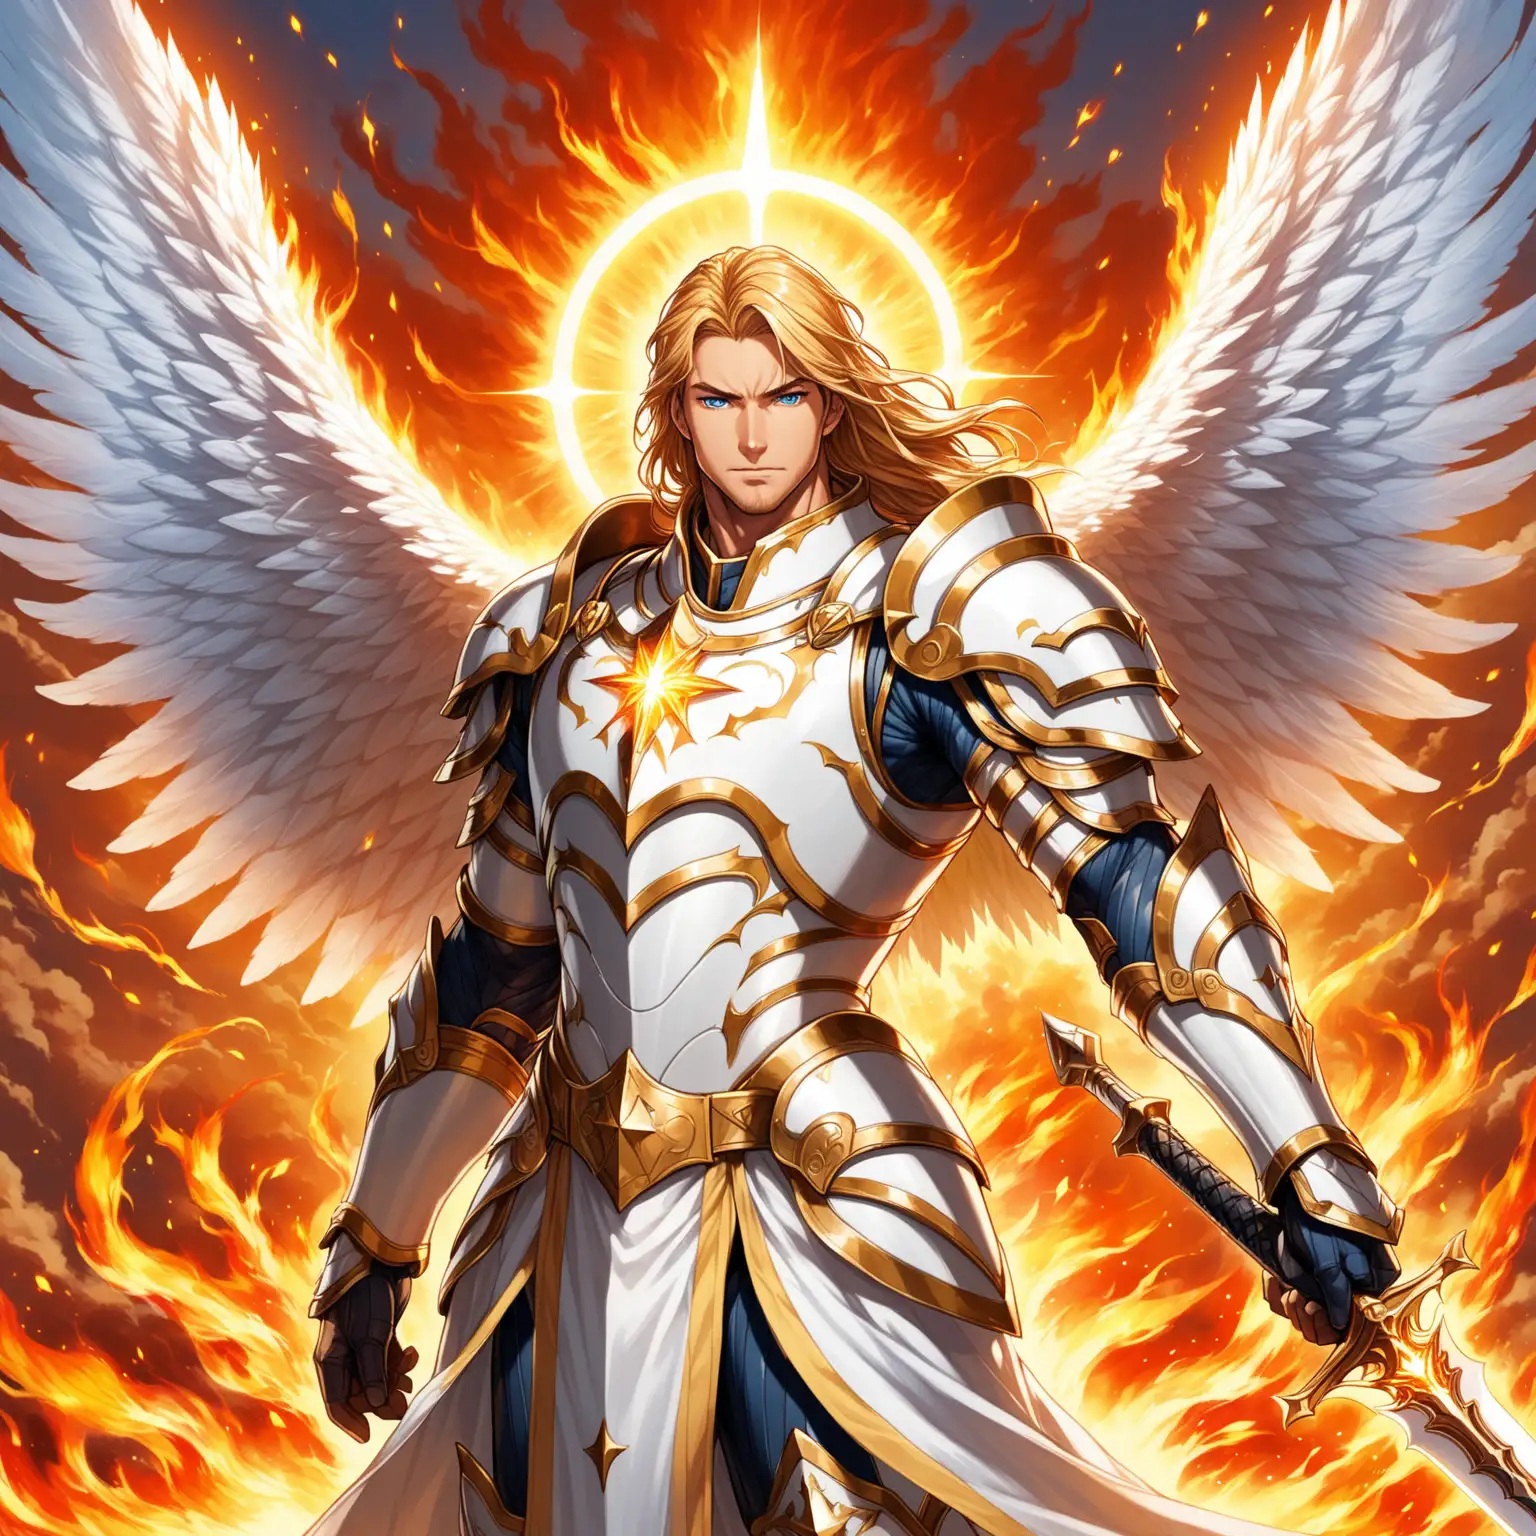 Seraphic Paladin Soaring at Dawn with Fiery Wings